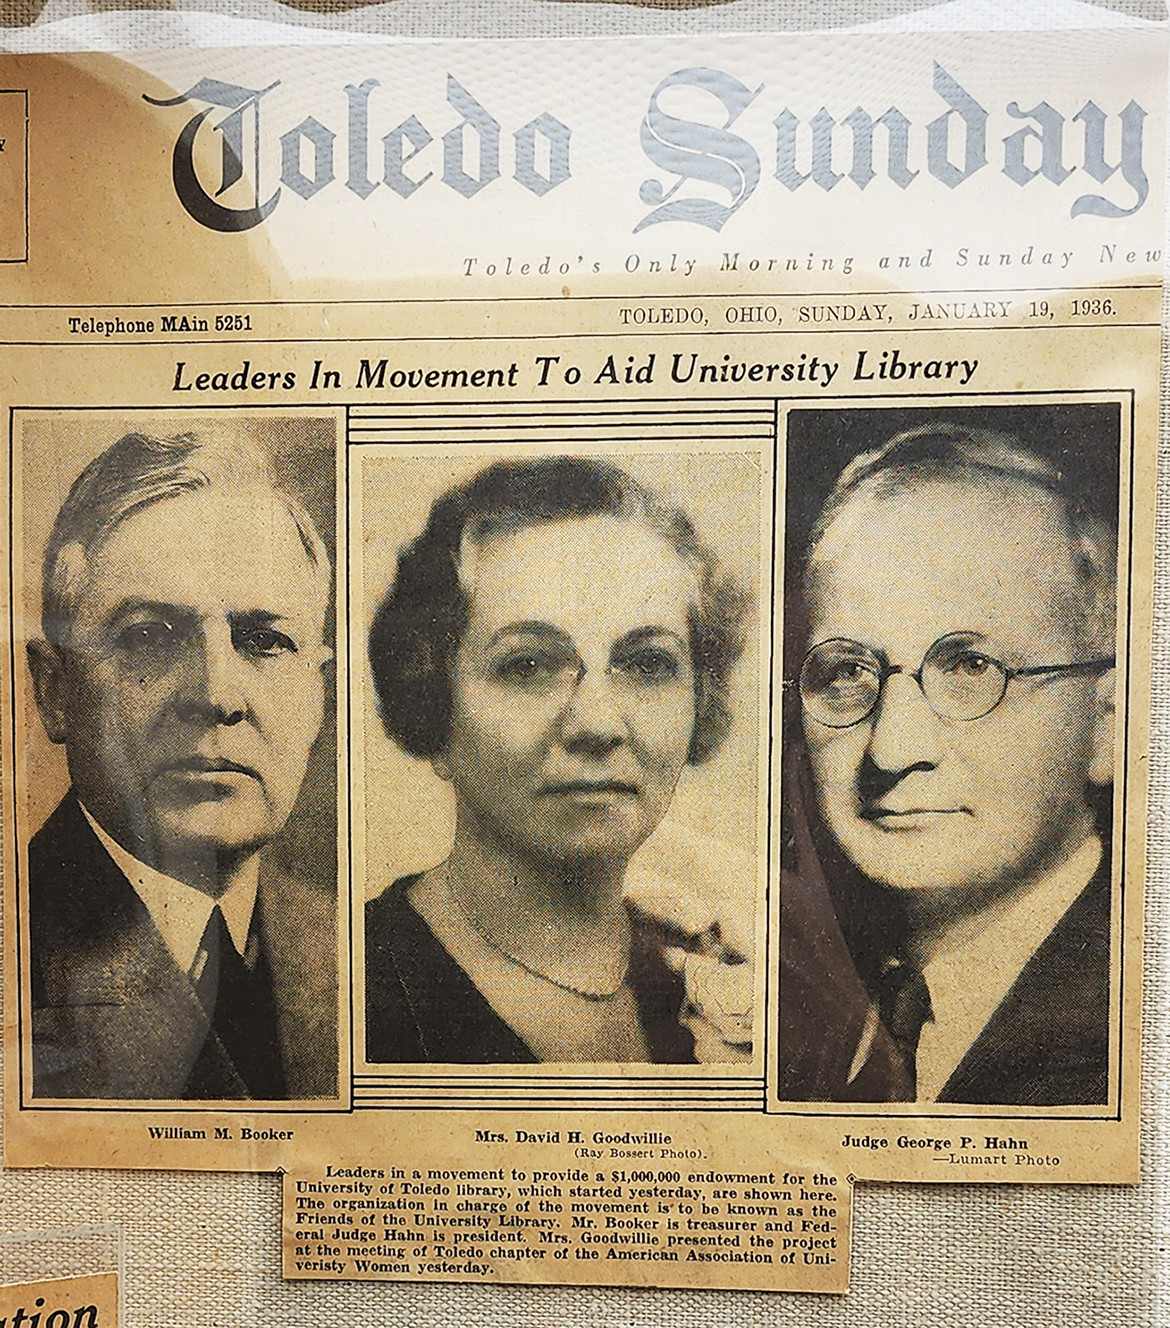 Leaders in Movement To Aid University Library, Article (January 19, 1936)